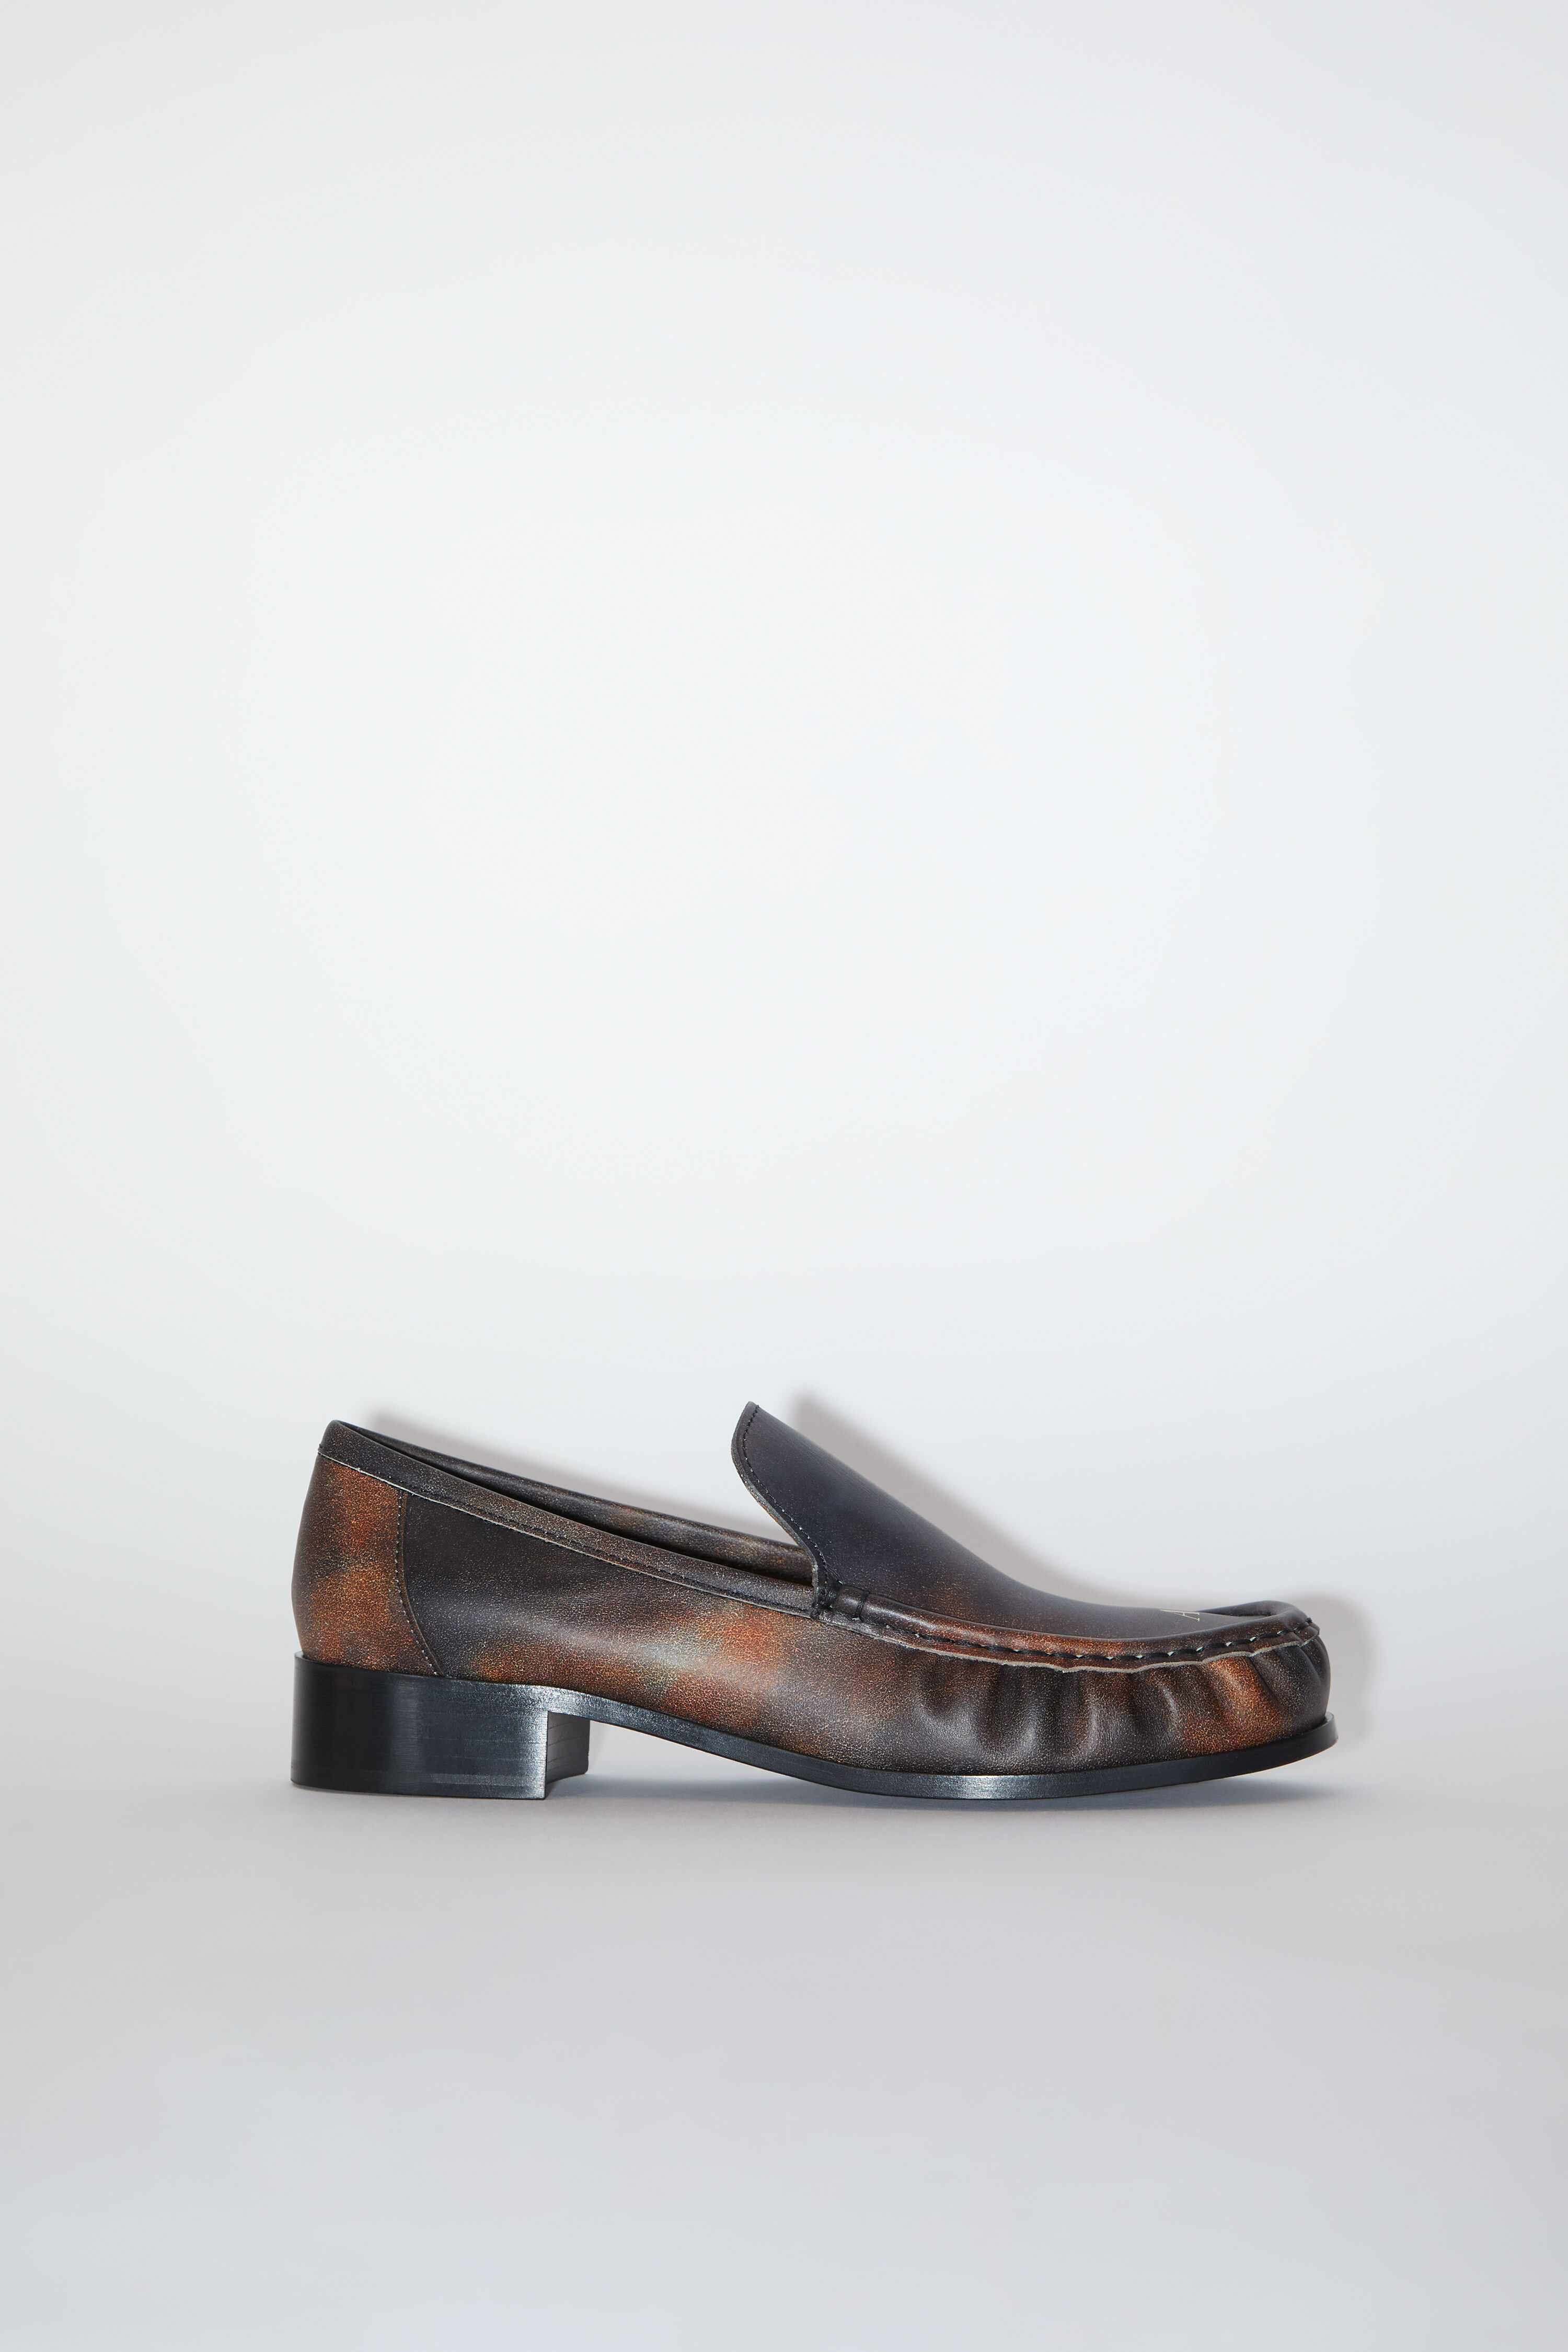 Acne Studios - Painted leather loafer - Multi brown